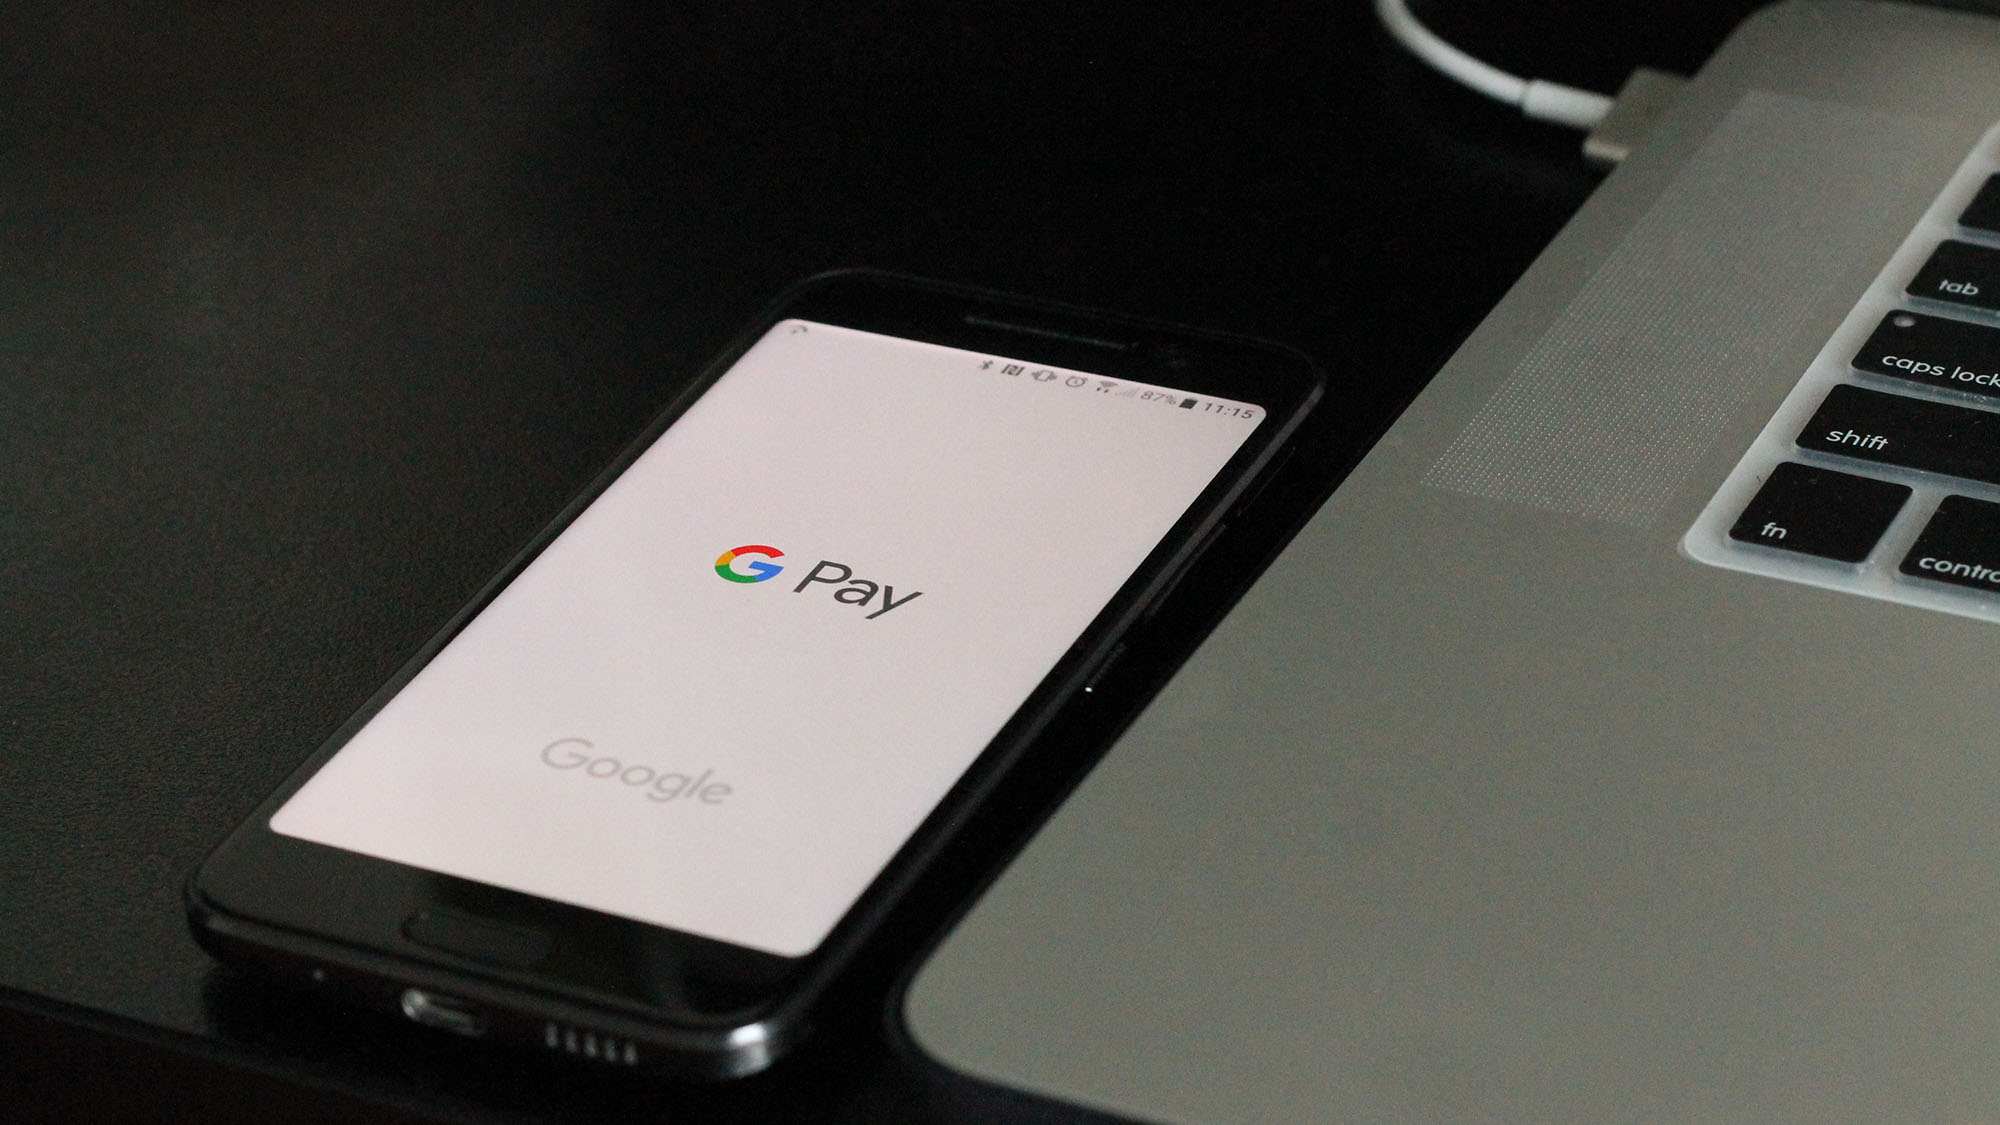 An image of a smartphone with the Google Pay application open on the screen, sitting next to a laptop computer.